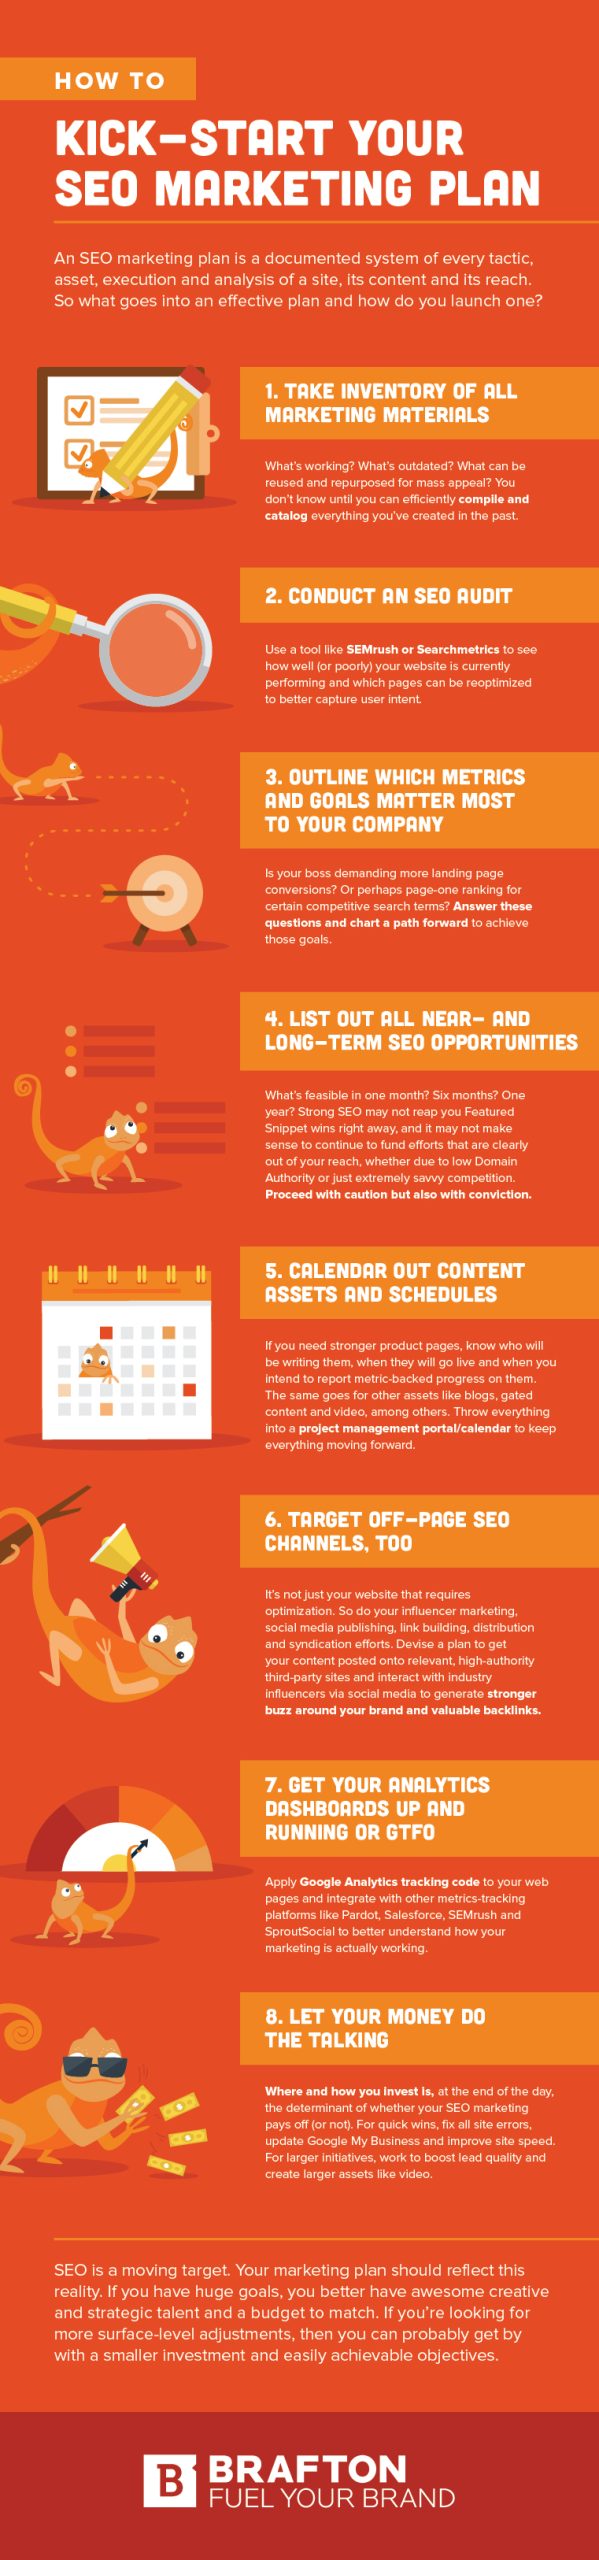 how to kick-start your SEO marketing plan infographic